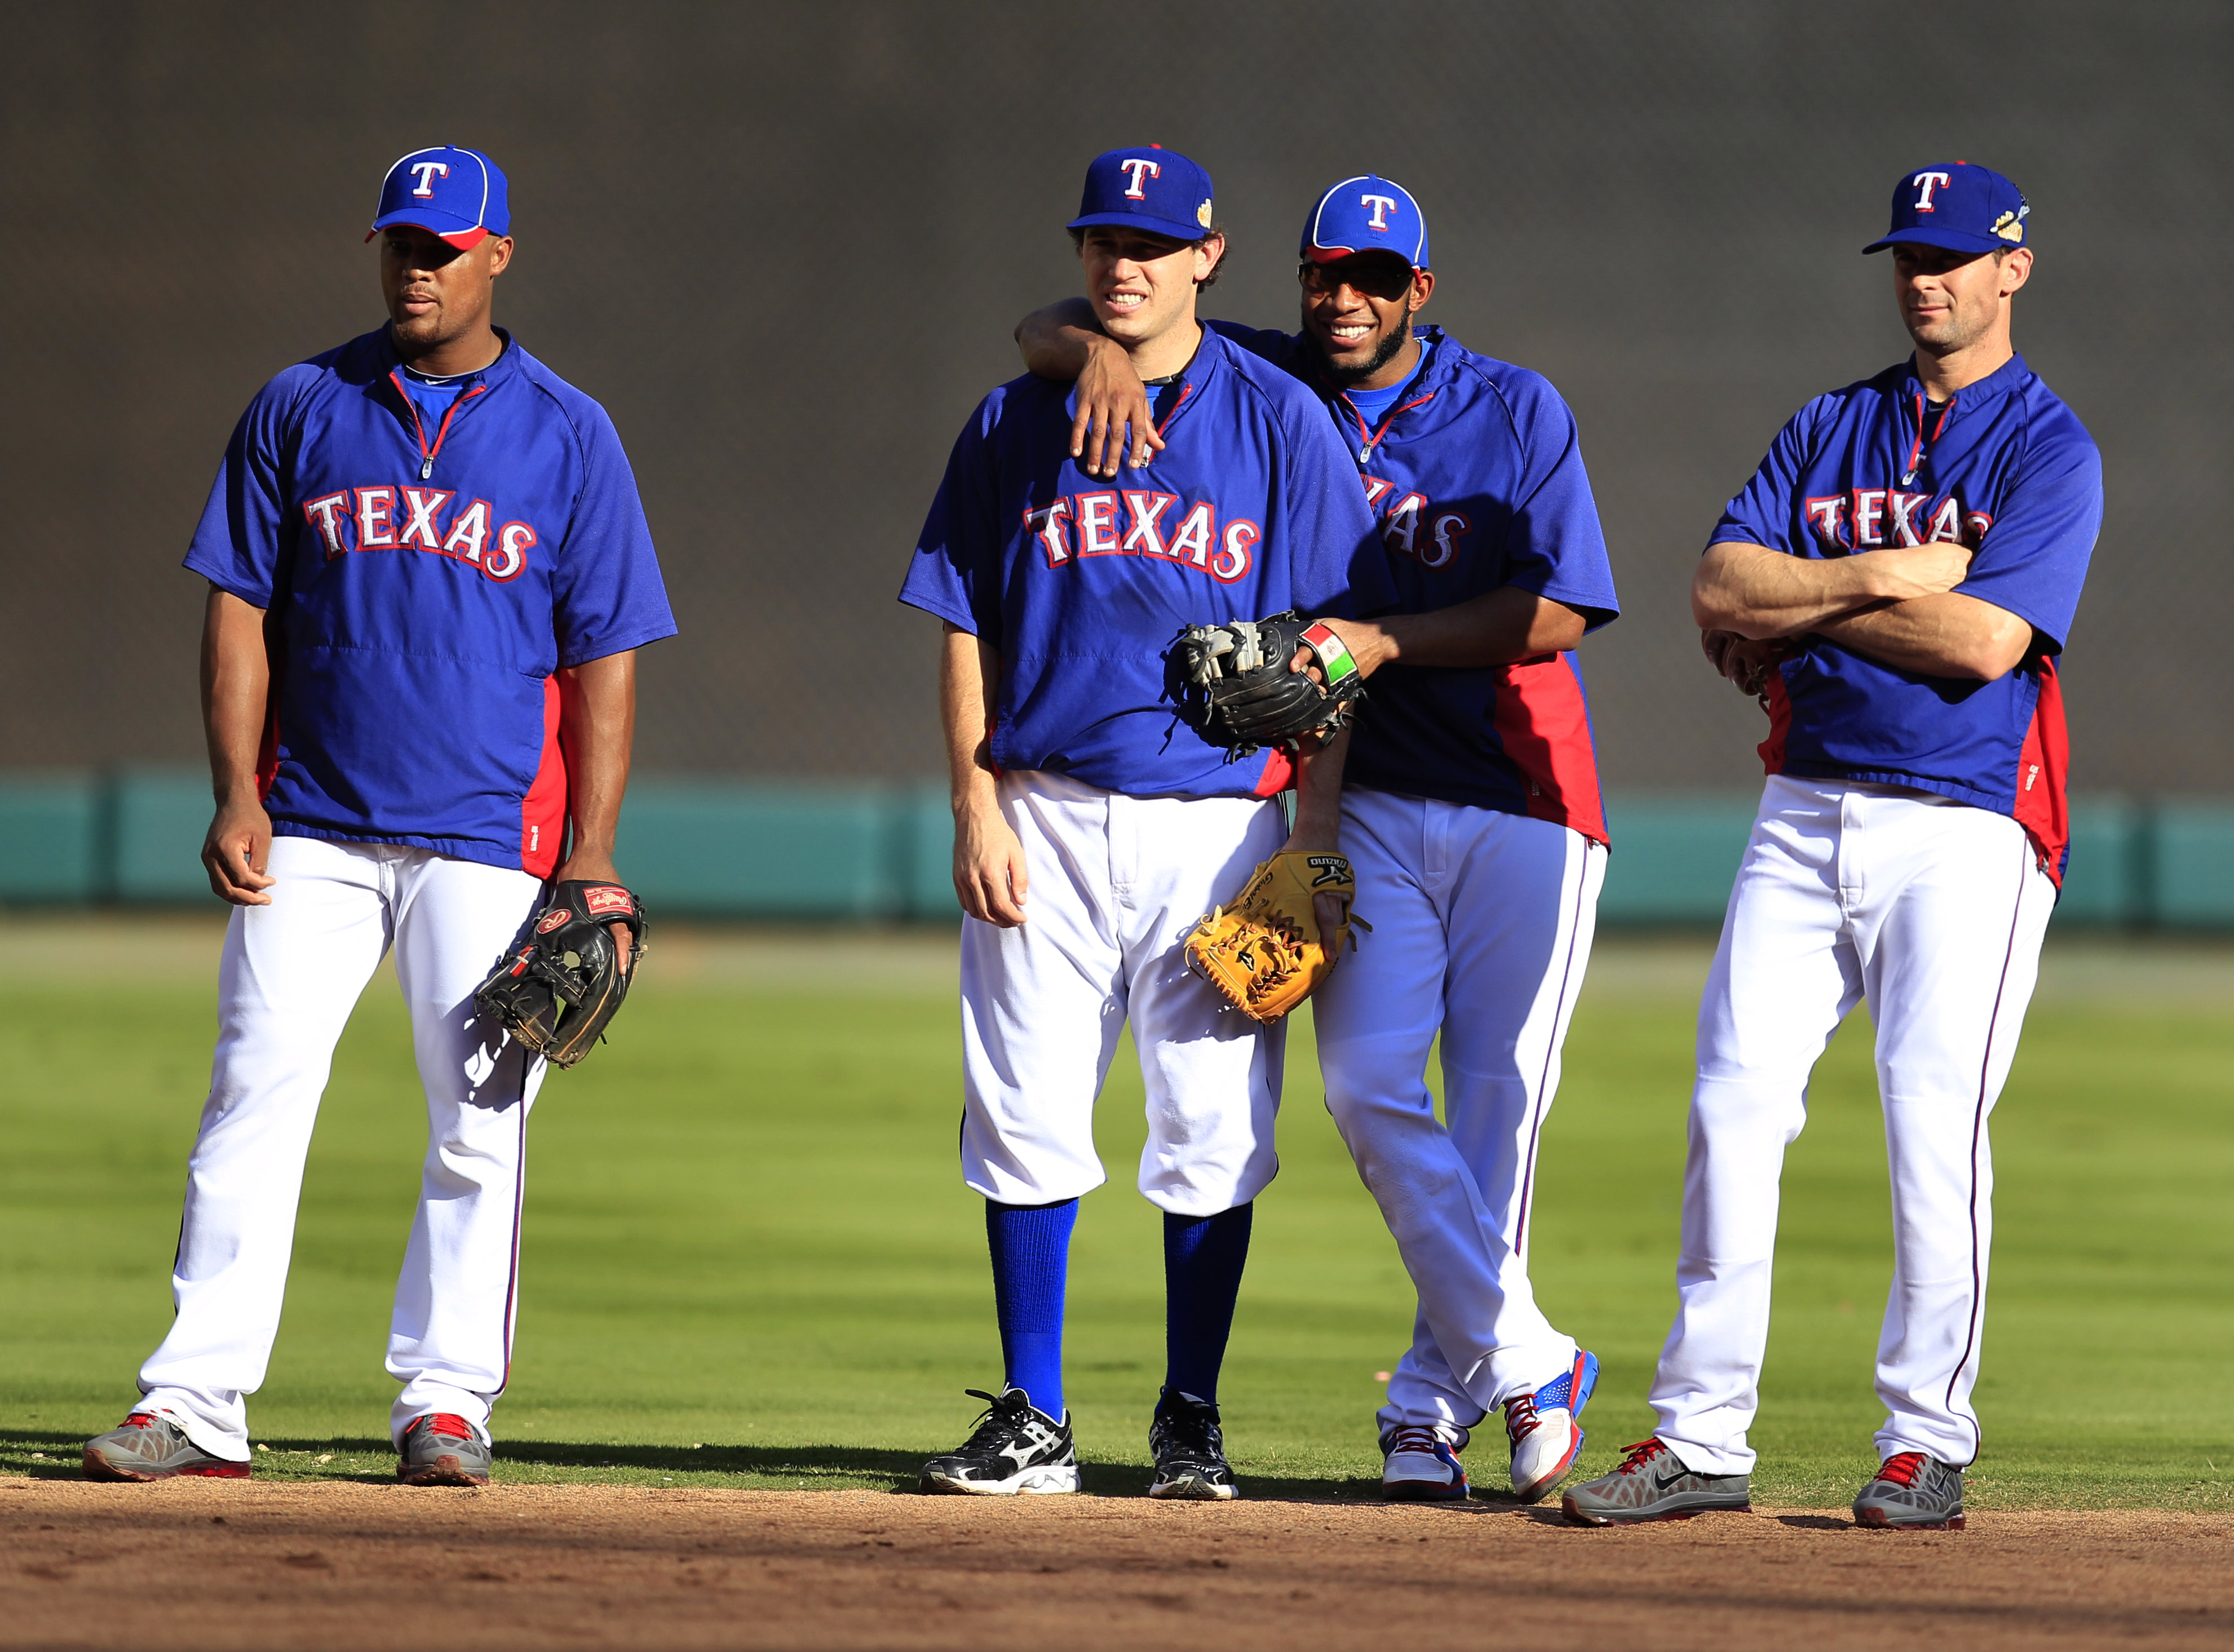 Is Ian Kinsler really the new face of the Texas Rangers?